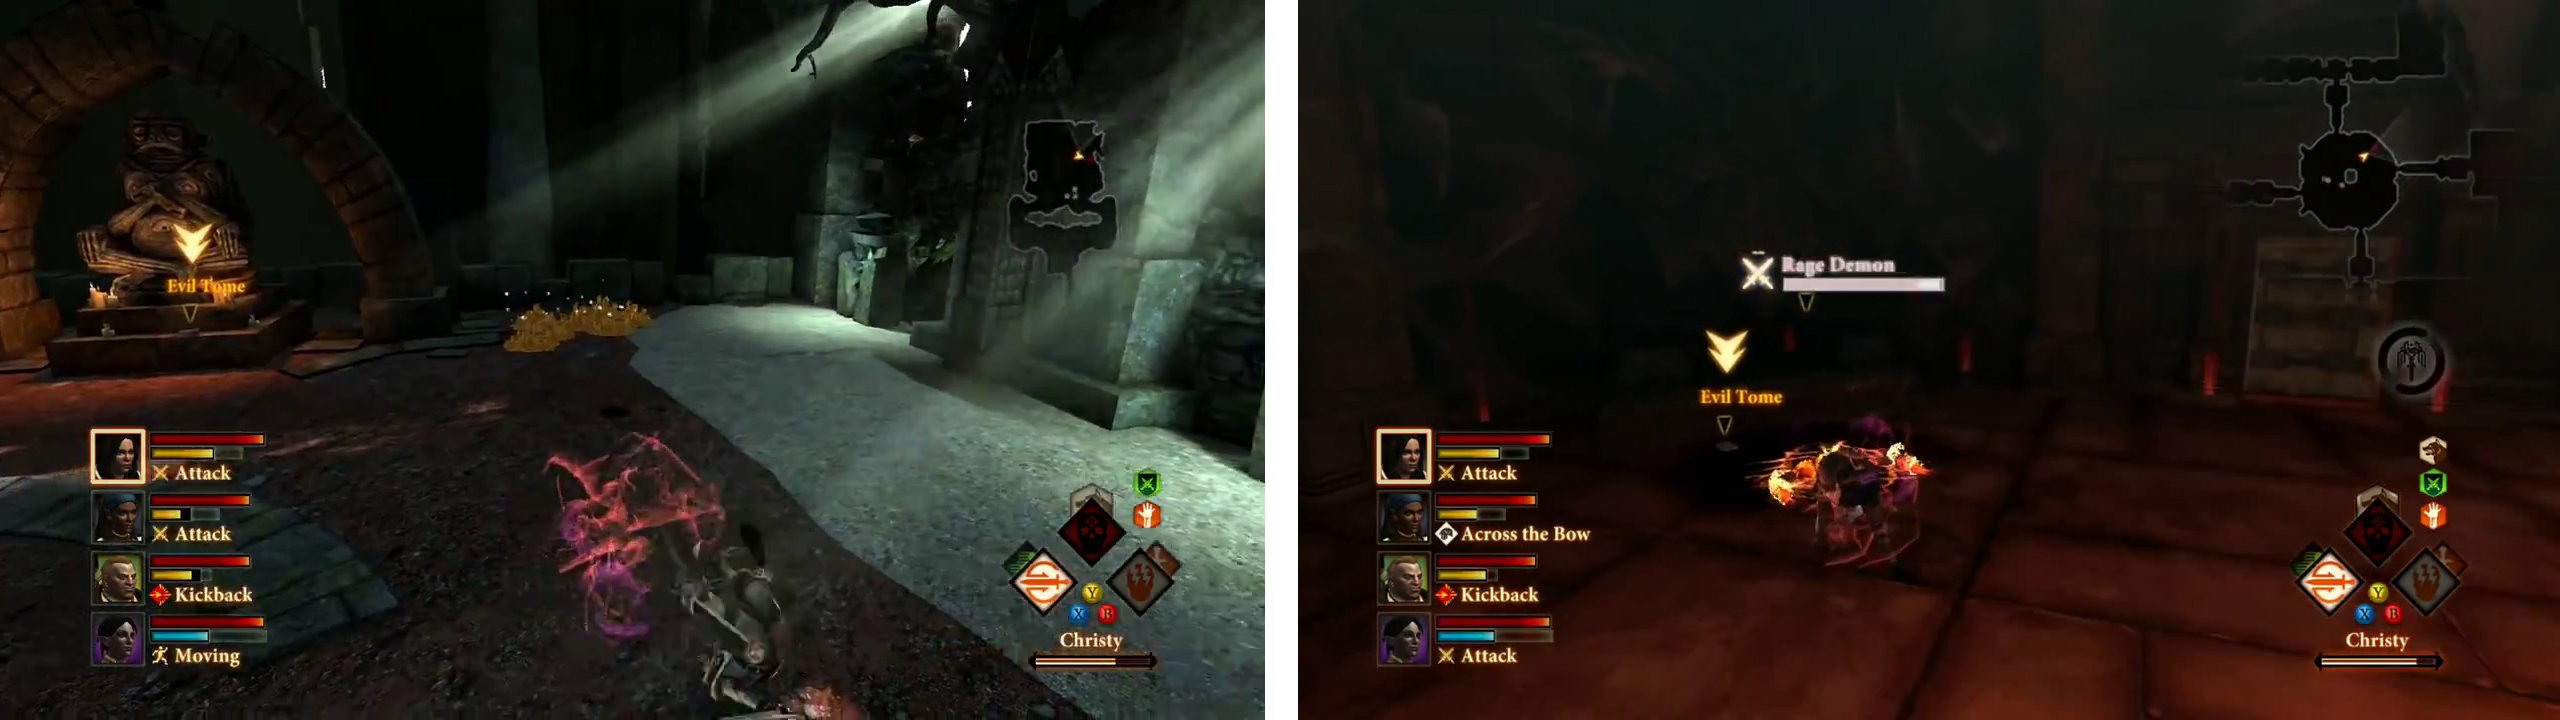 The evil tomes in The Wounded Coast (left) and Sundermount (right).